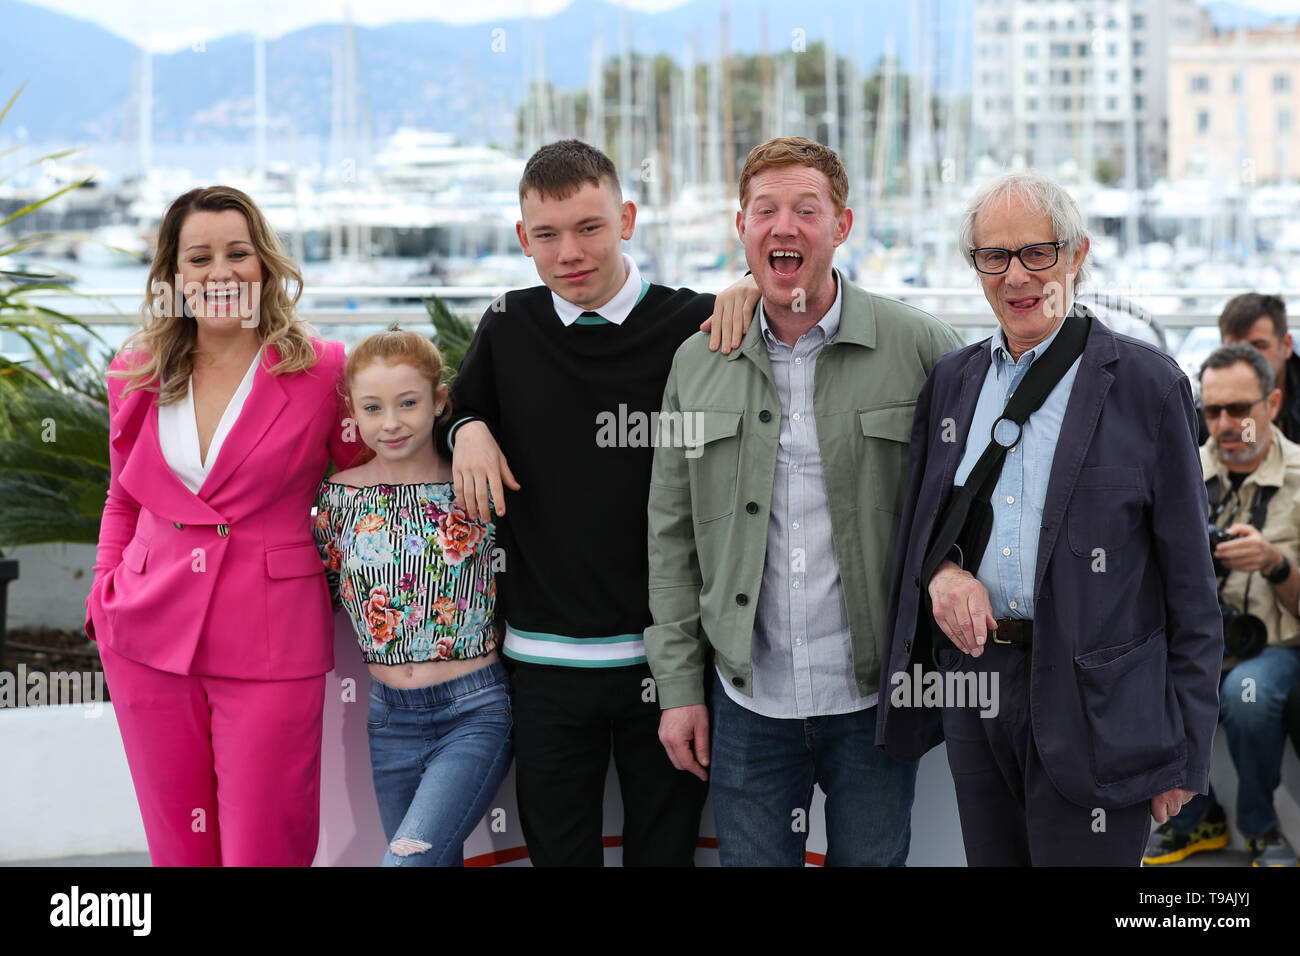 Cannes, France. 17th May, 2019. (L-R) Debbie Honeywood, Katie Proctor, Rhys Stone, Kris Hitchen and director Ken Loach pose during a photocall for the film 'Sorry We Missed You' at the 72nd Cannes Film Festival in Cannes, France, May 17, 2019. British director Ken Loach's film 'Sorry We Missed You' will compete for the Palme d'Or with other 20 feature films during the 72nd Cannes Film Festival which is held from May 14 to 25. Credit: Zhang Cheng/Xinhua/Alamy Live News Stock Photo